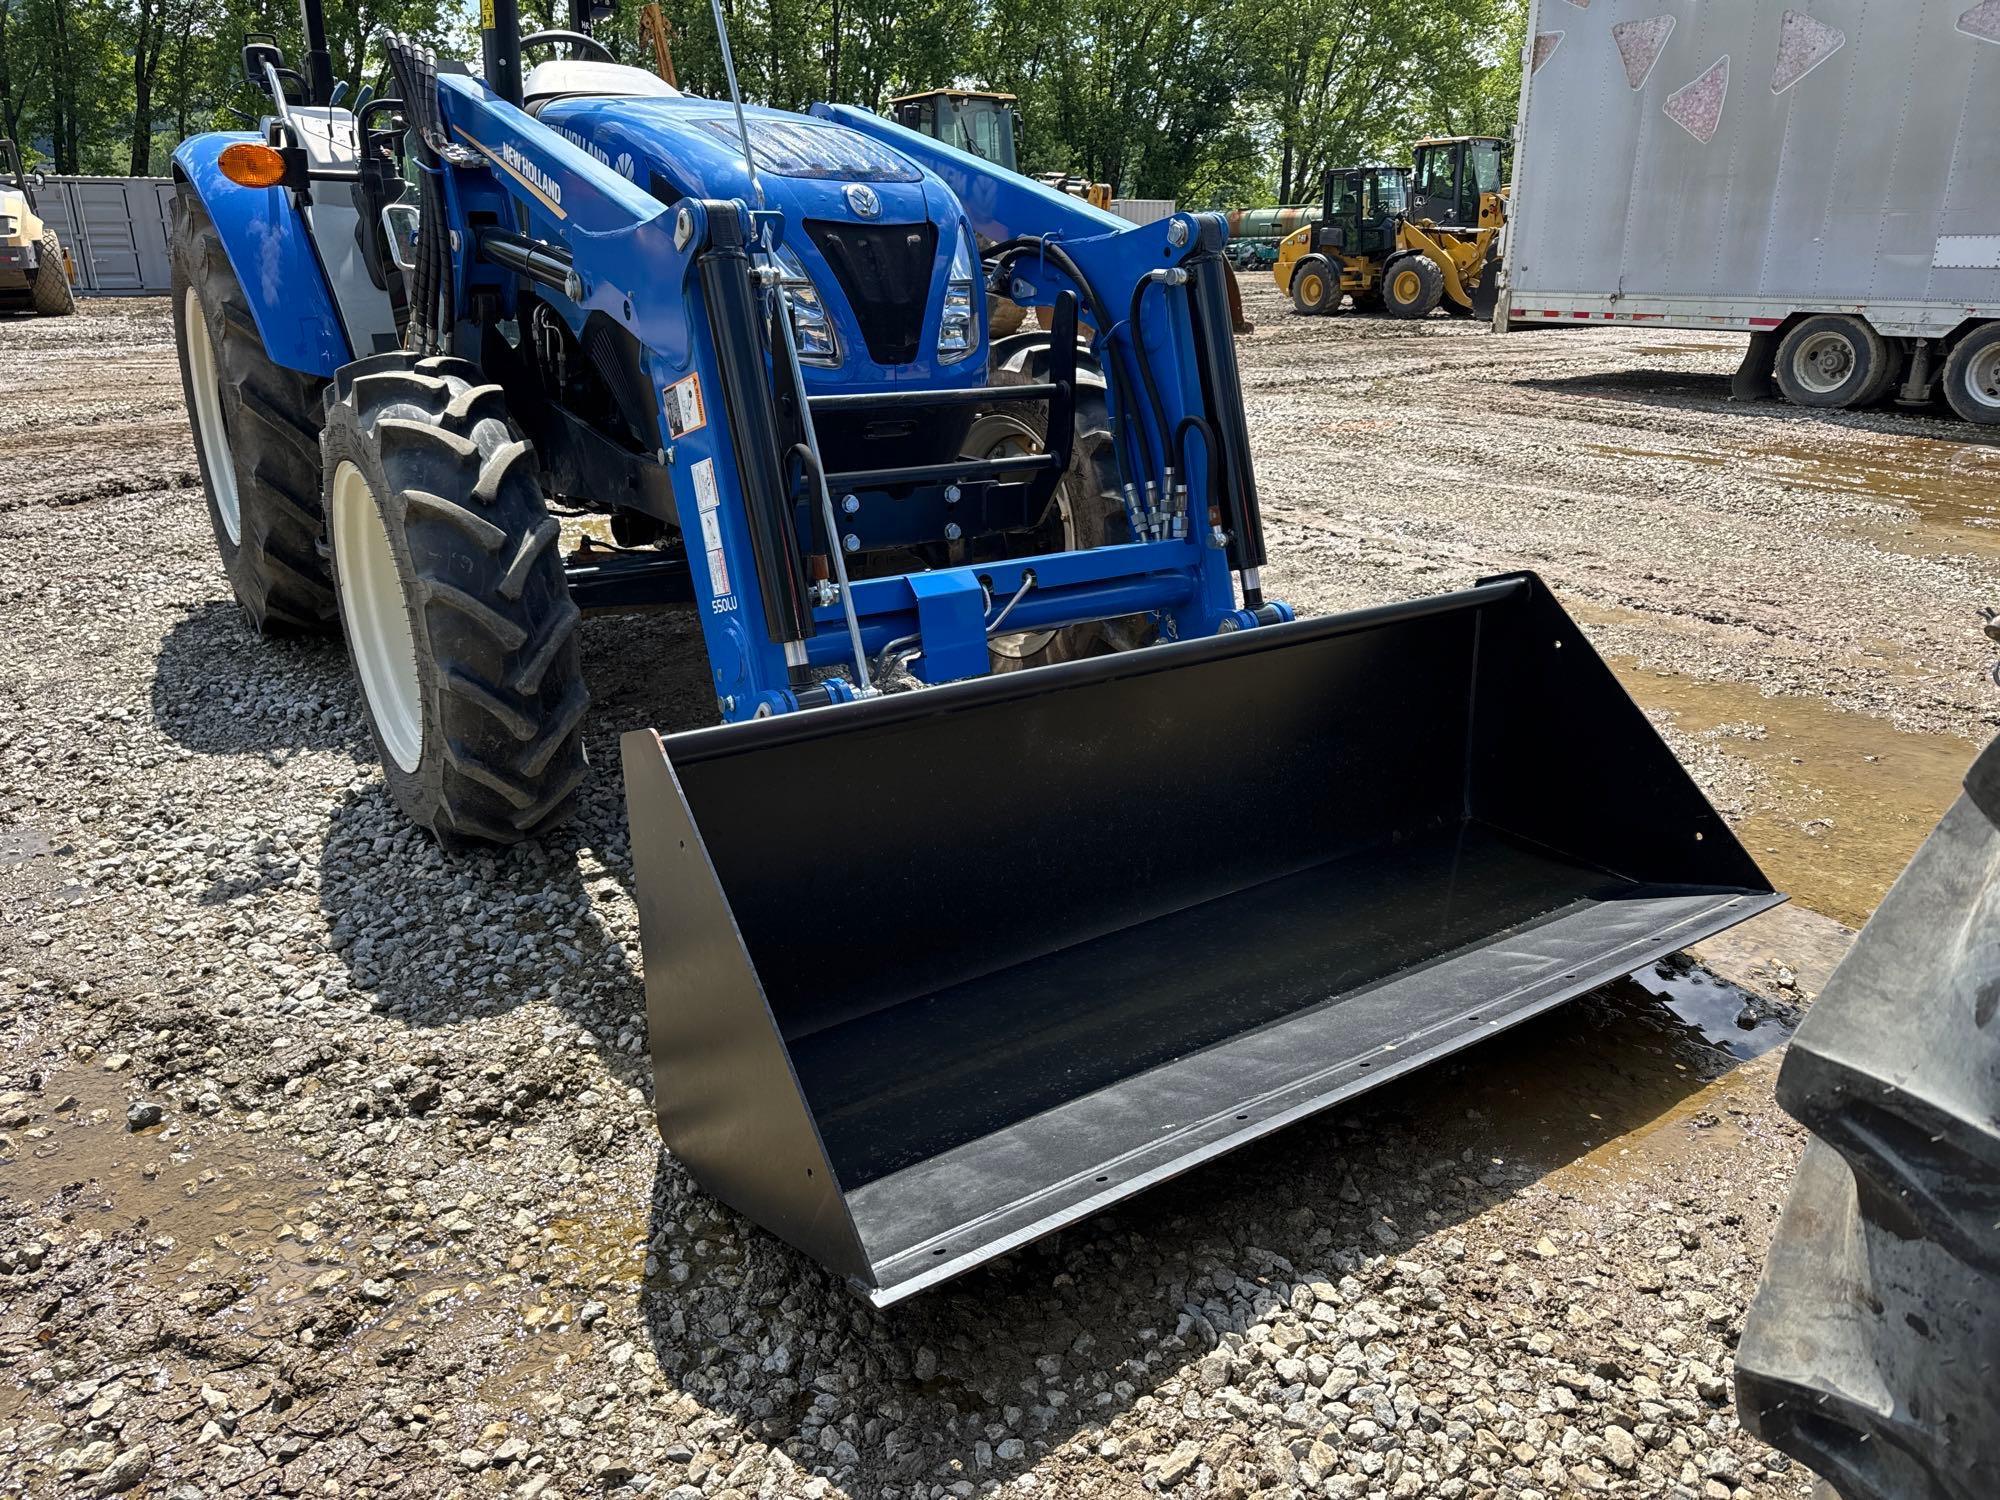 2022 NEW HOLLAND WORKMASTER 75 TRACTOR LOADER SN-03755, 4x4, powered by diesel engine, equipped with